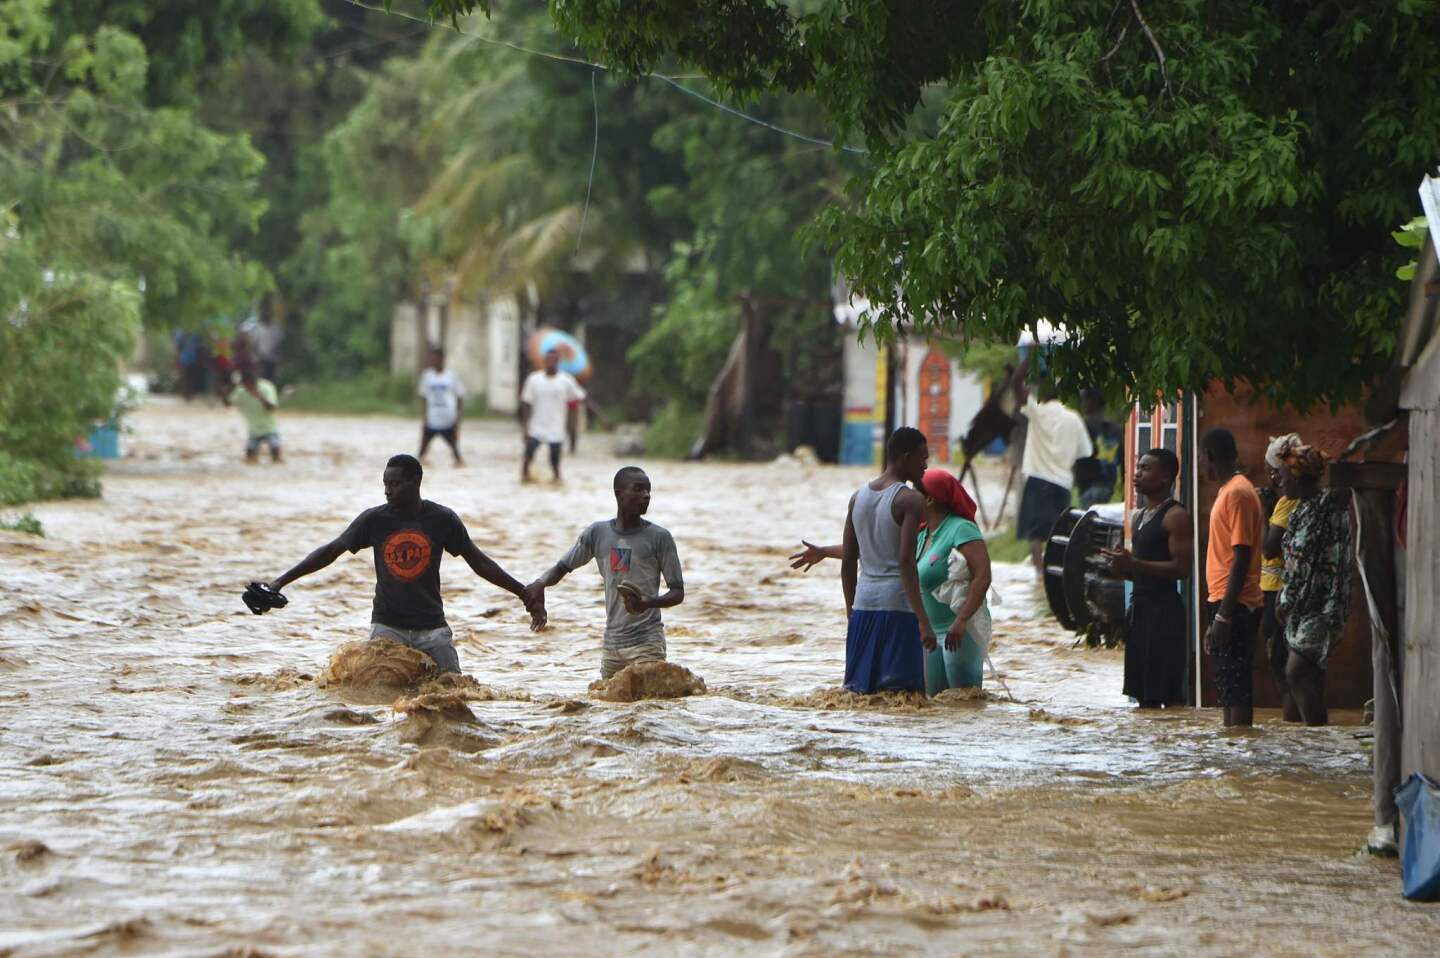 People try to cross the overflowing Rouyonne river in the community of Leogane, south of Port-au-Prince, Haiti, on Oct. 5, 2016.